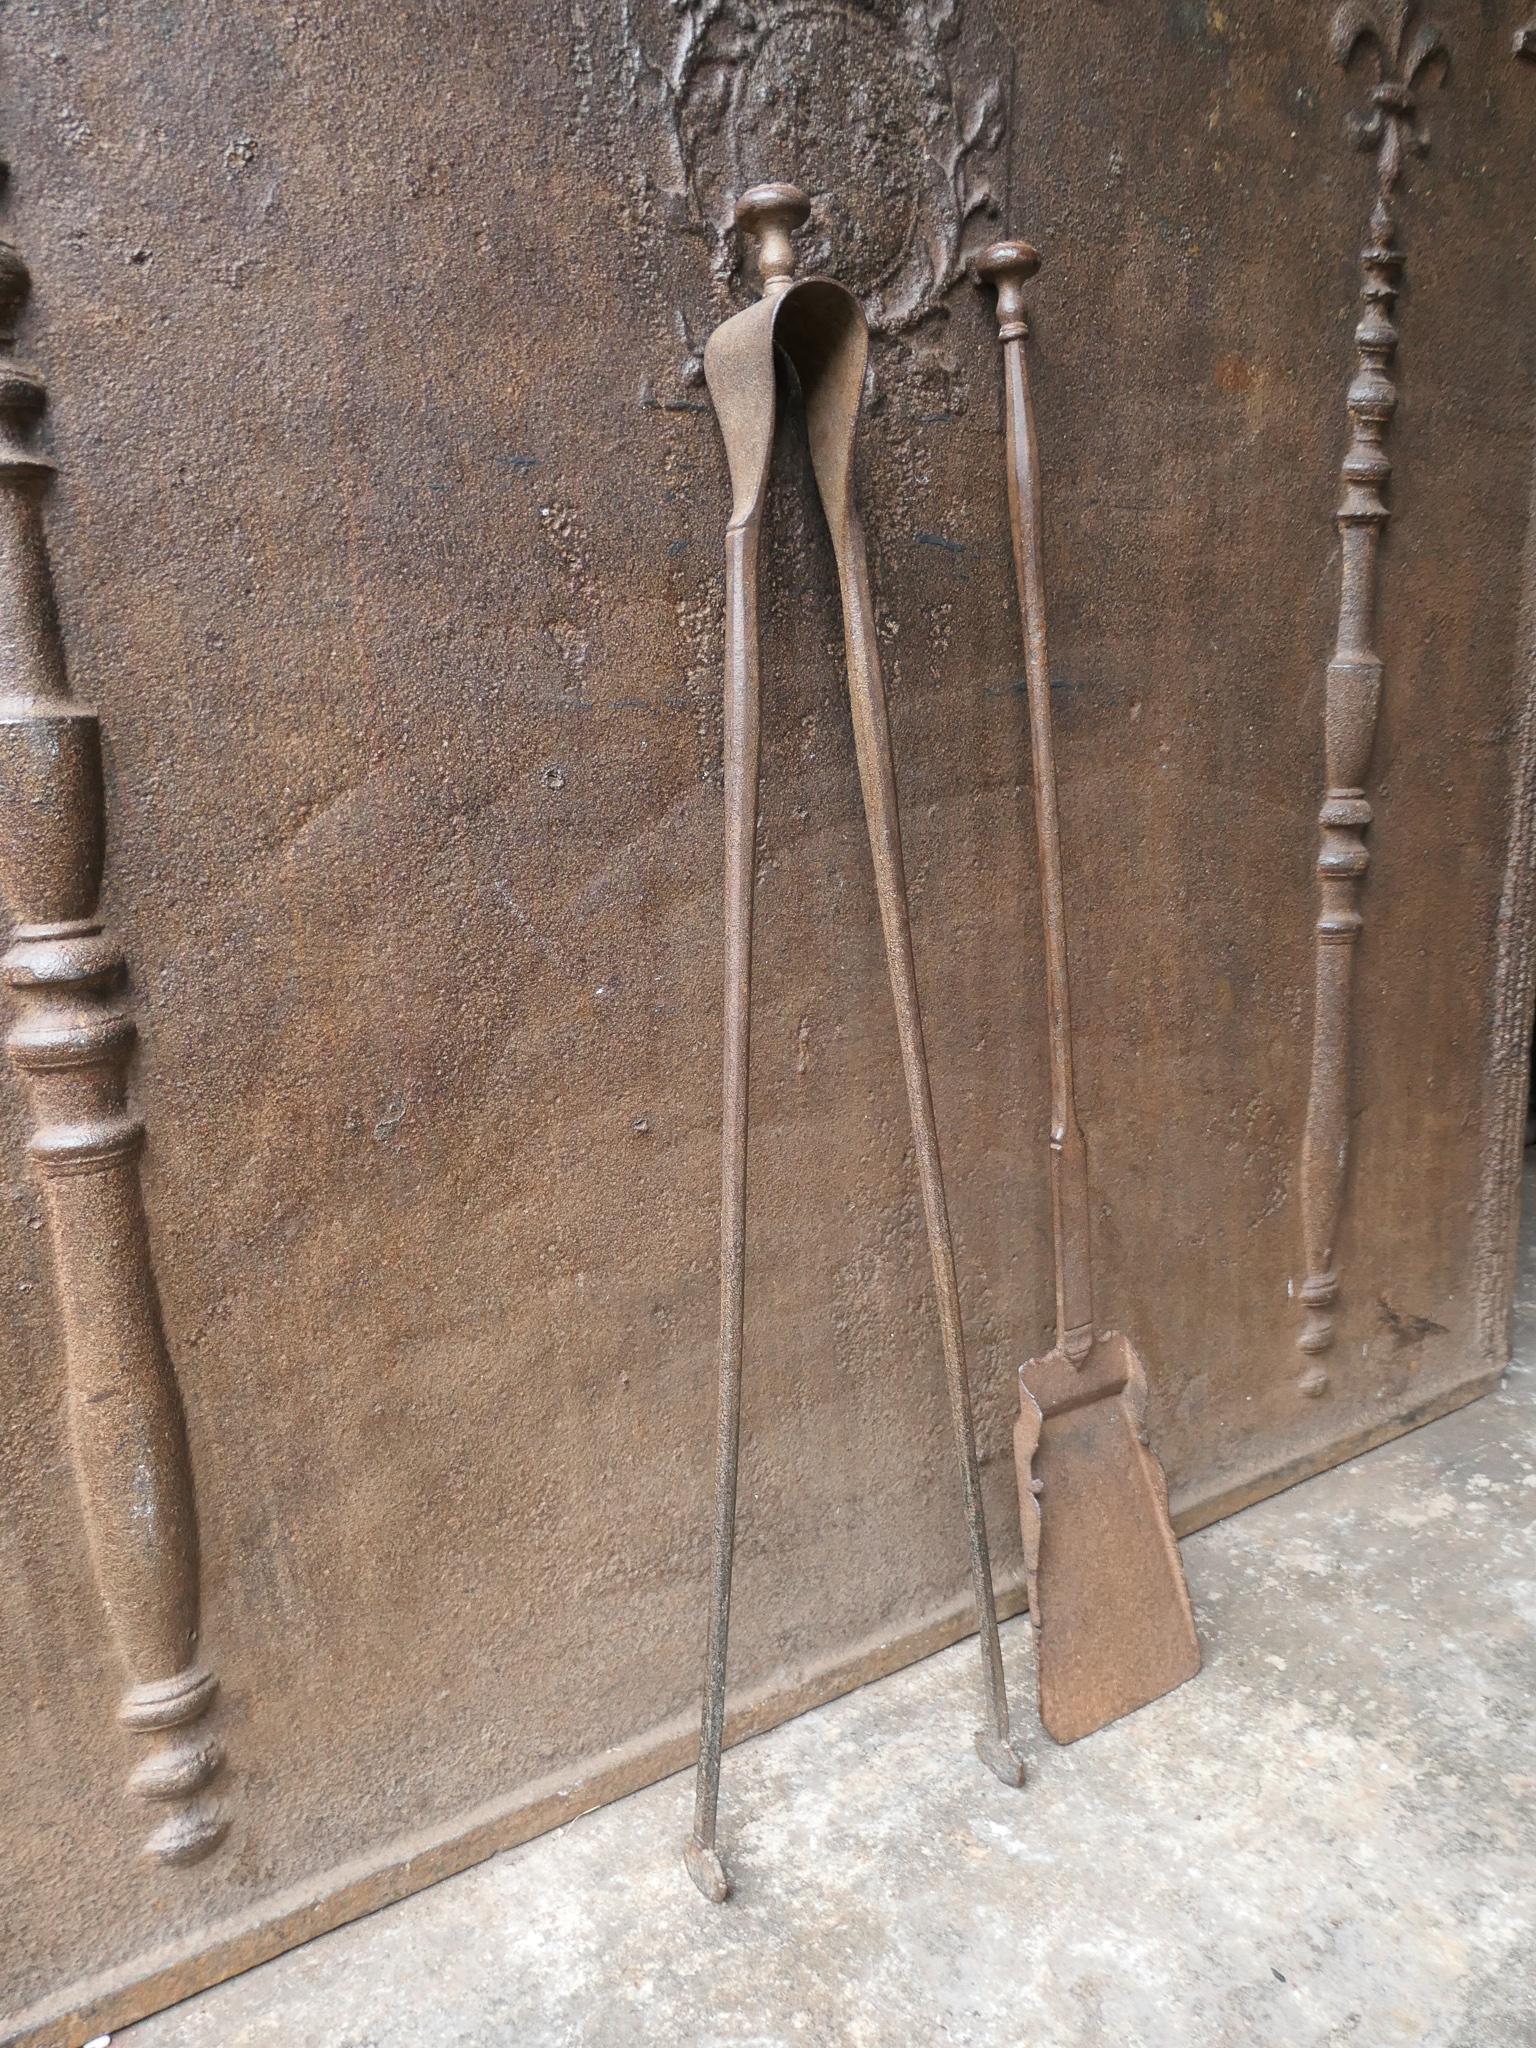 Antique 18th century French Louis XV period fireside companion set. The tool set consists of tongs and shovel. Made of wrought iron. It is in a good condition and is fully functional.